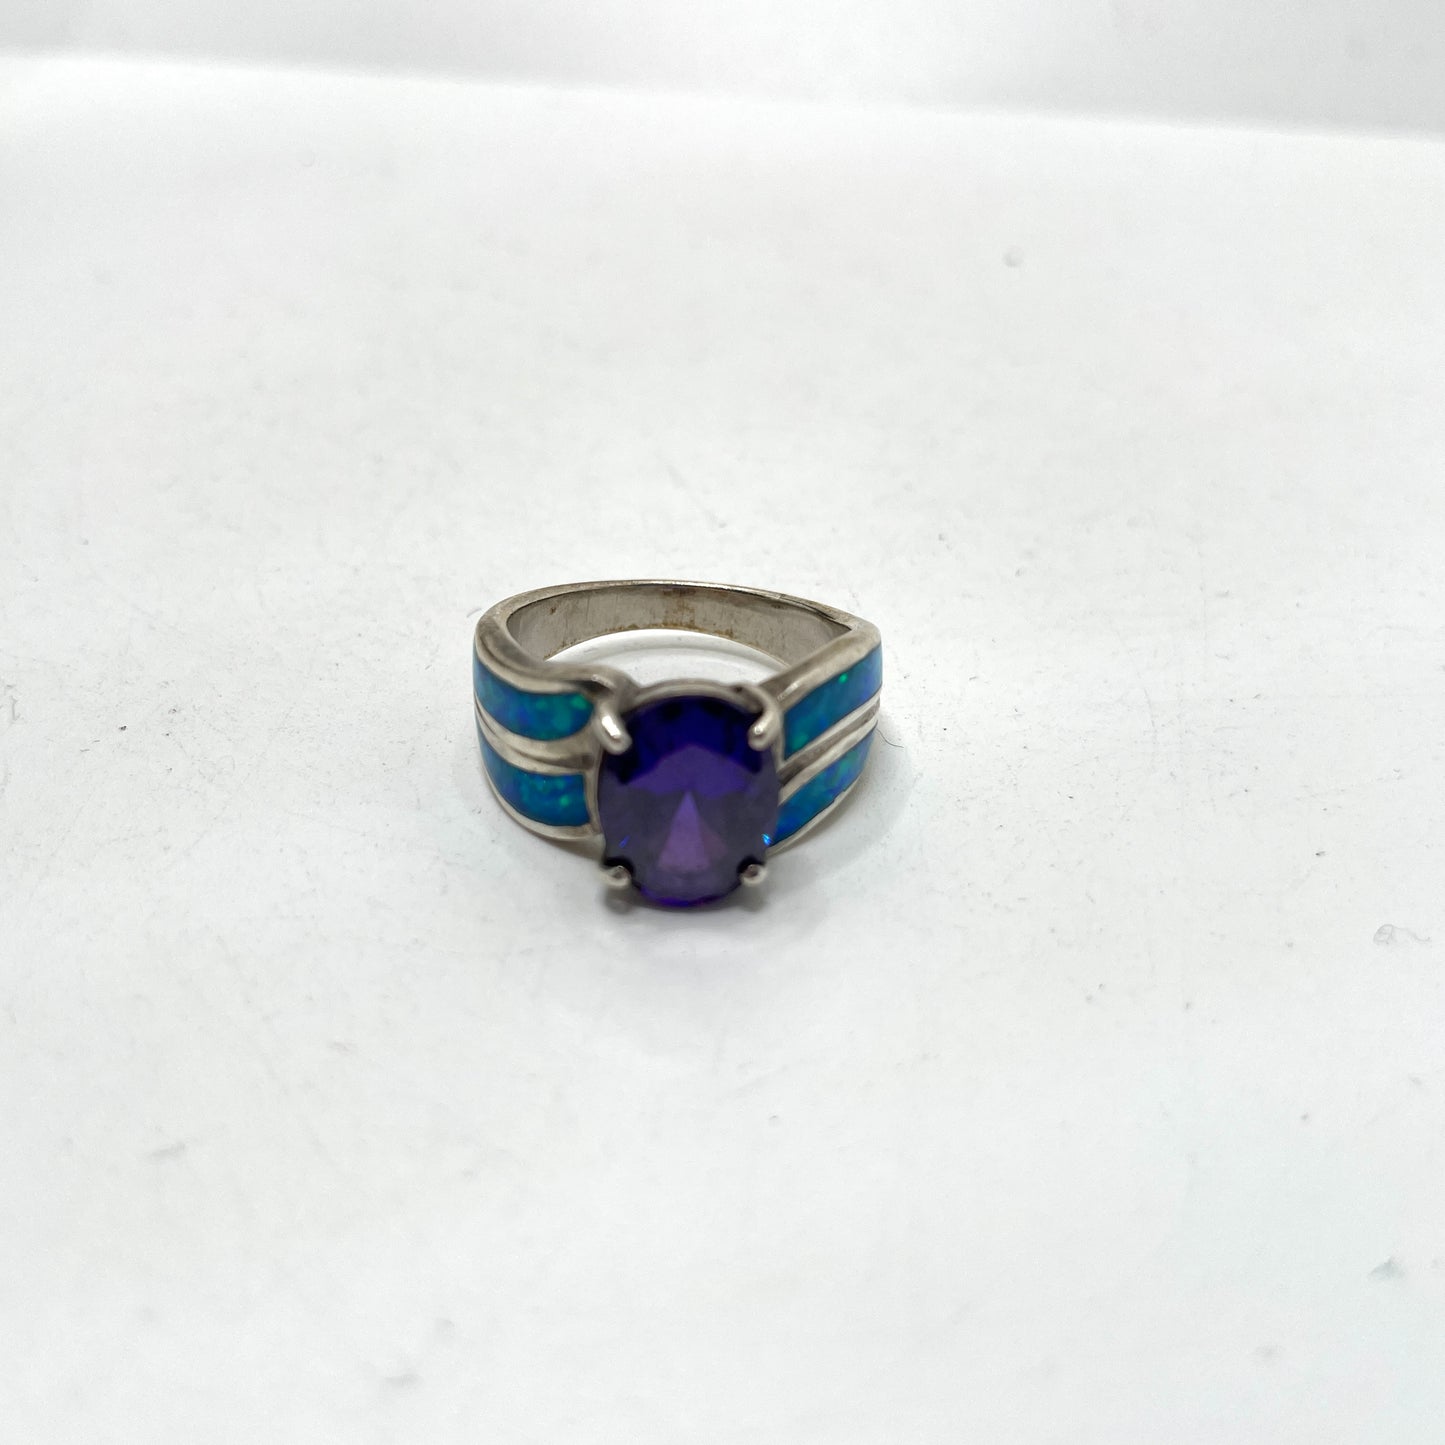 Vintage Opal & Amethyst Sterling Silver Ring - Size 9